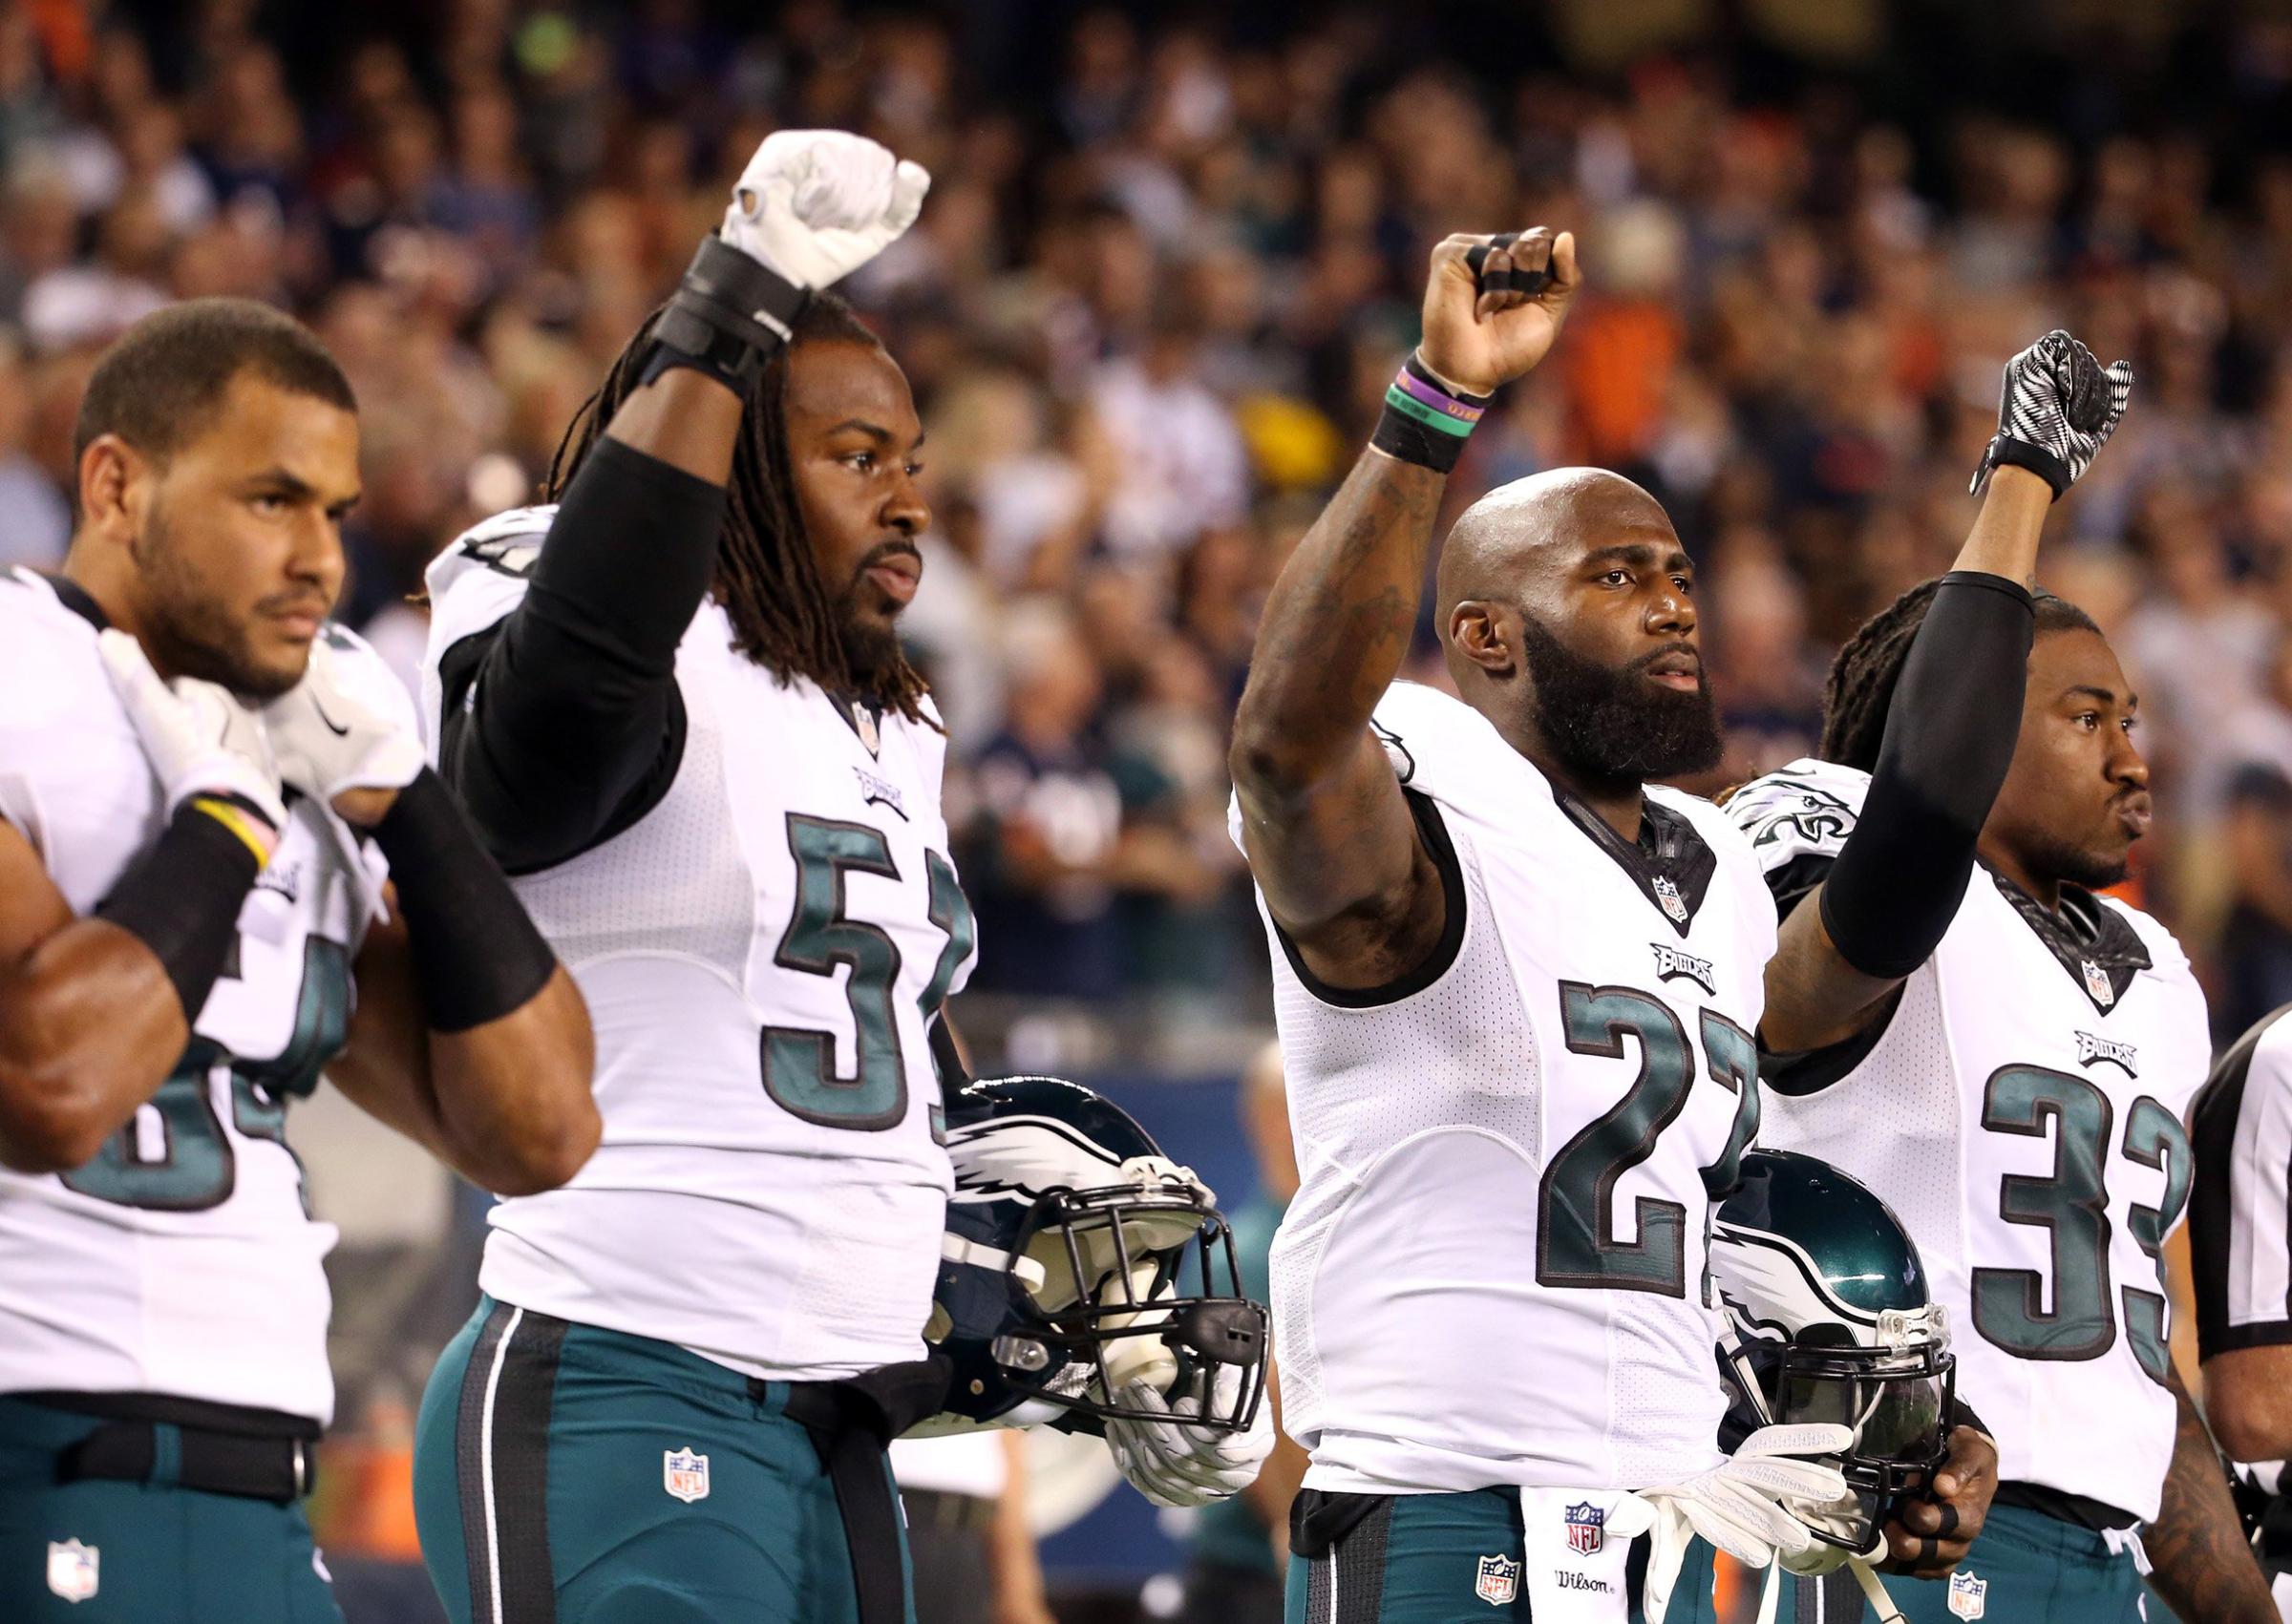 Philadelphia Eagles players Steven Means (51), Malcolm Jenkins (27) and Ron Brooks (33) raise their fists in the air during the national anthem for a game against the Chicago Bears at Soldier Field in Chicago on Sept. 19, 2016.